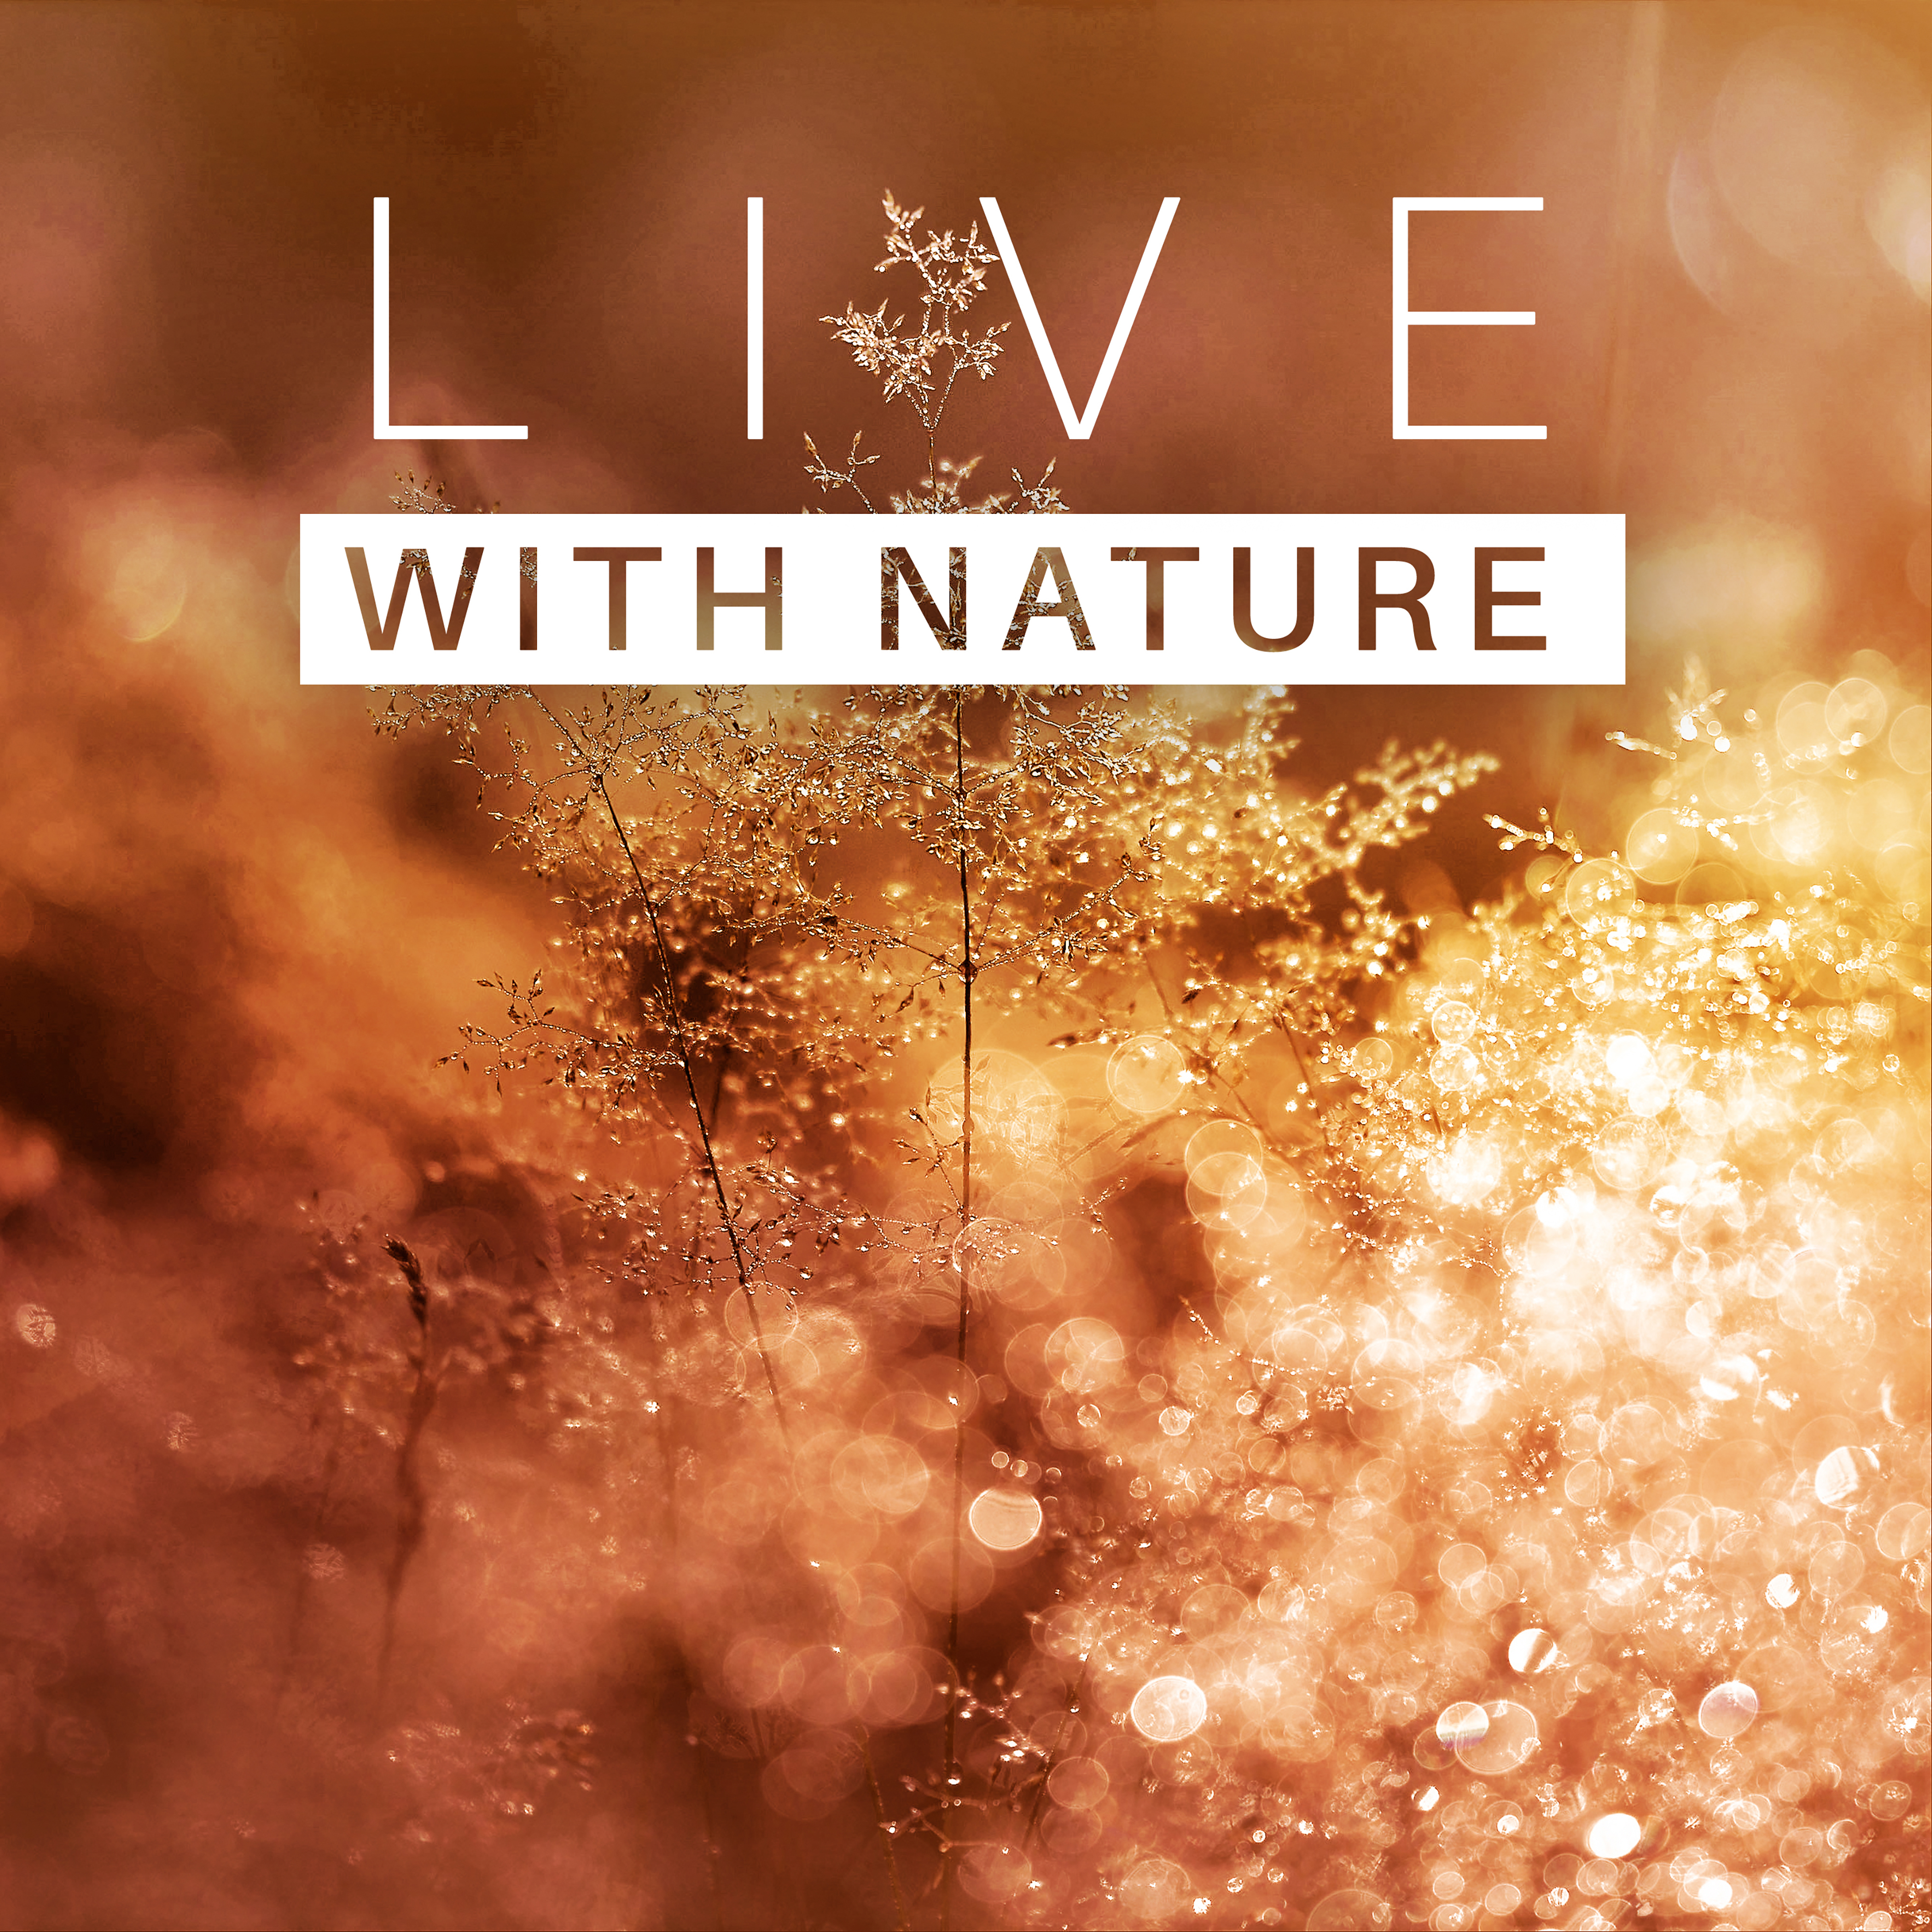 Live with Nature – Peaceful Music for Relaxation, Stress Free, Mind Power, Nature Sounds to Calm Down, Relaxing Waves